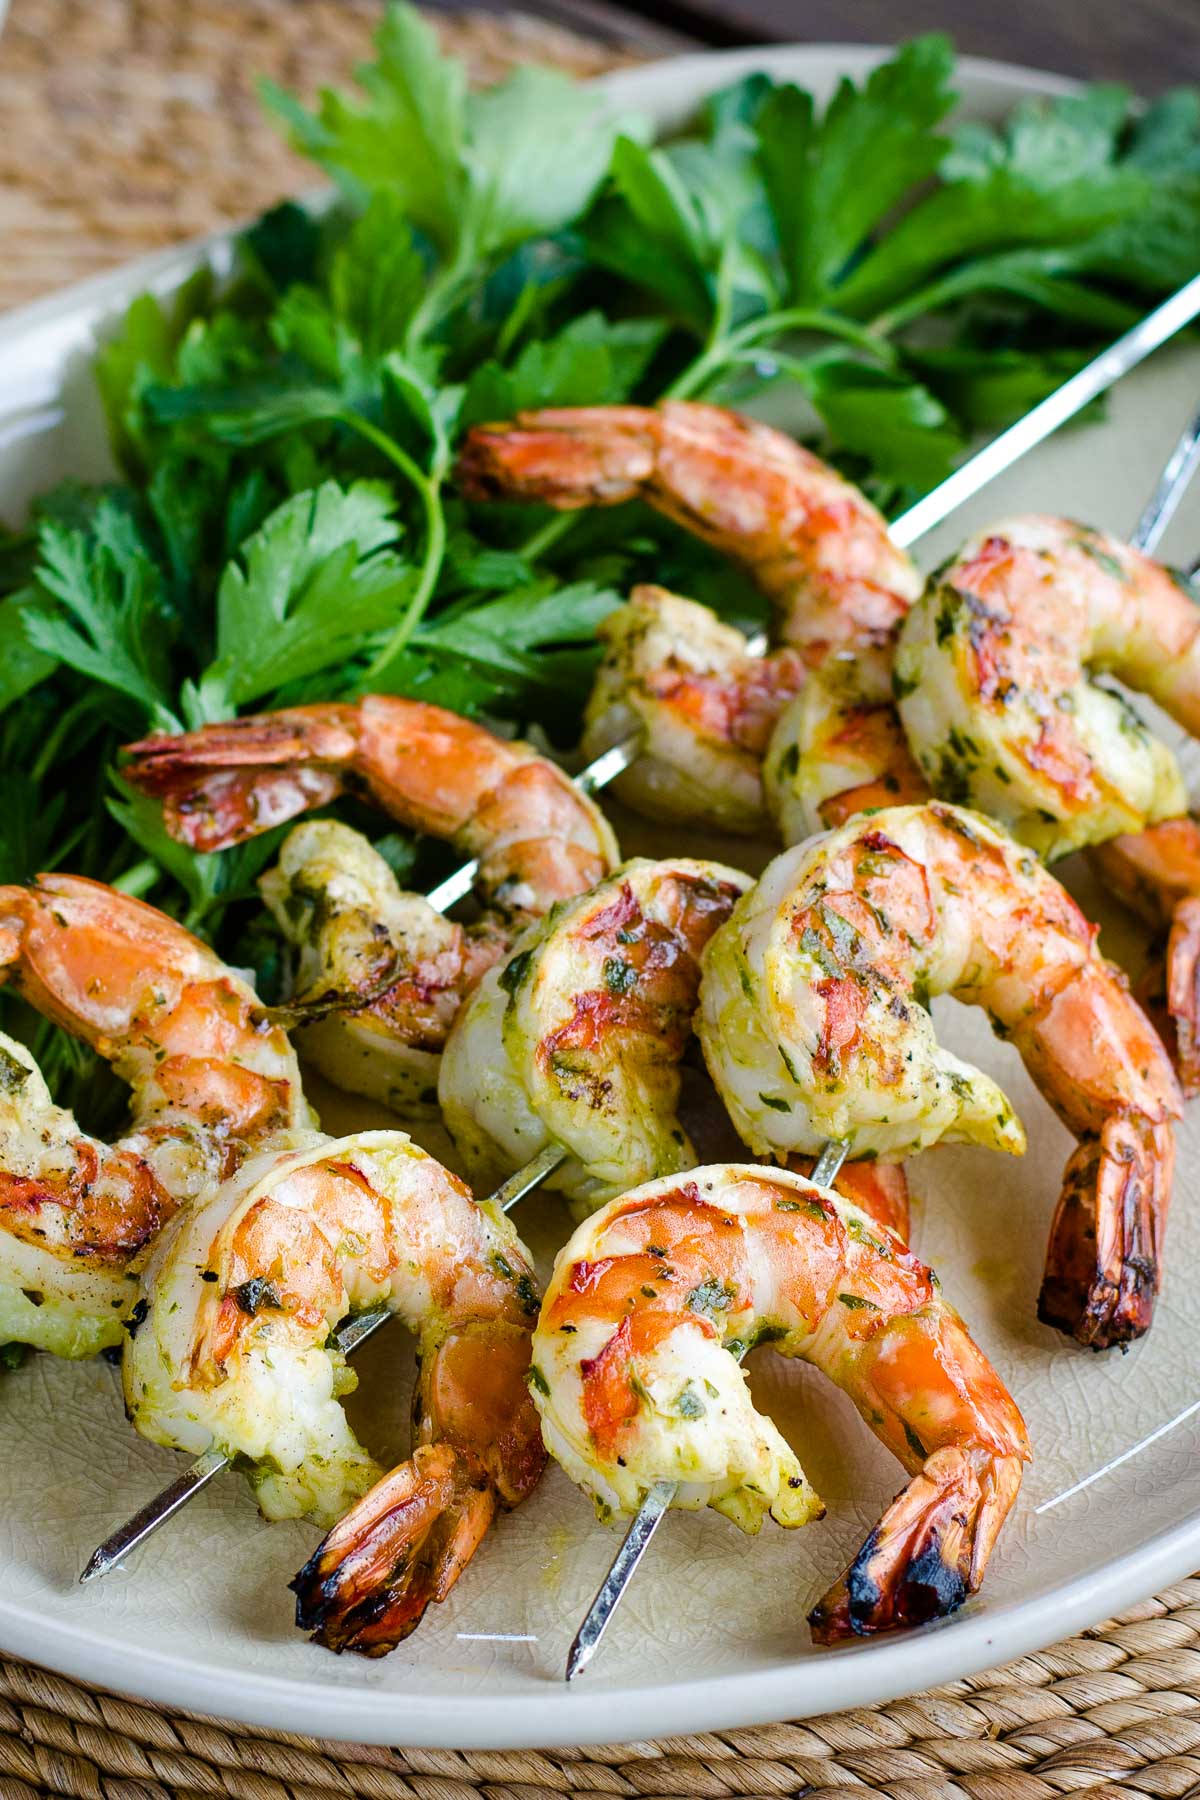 Grilled shrimp with chimichurri sauce on skewers with fresh parsley